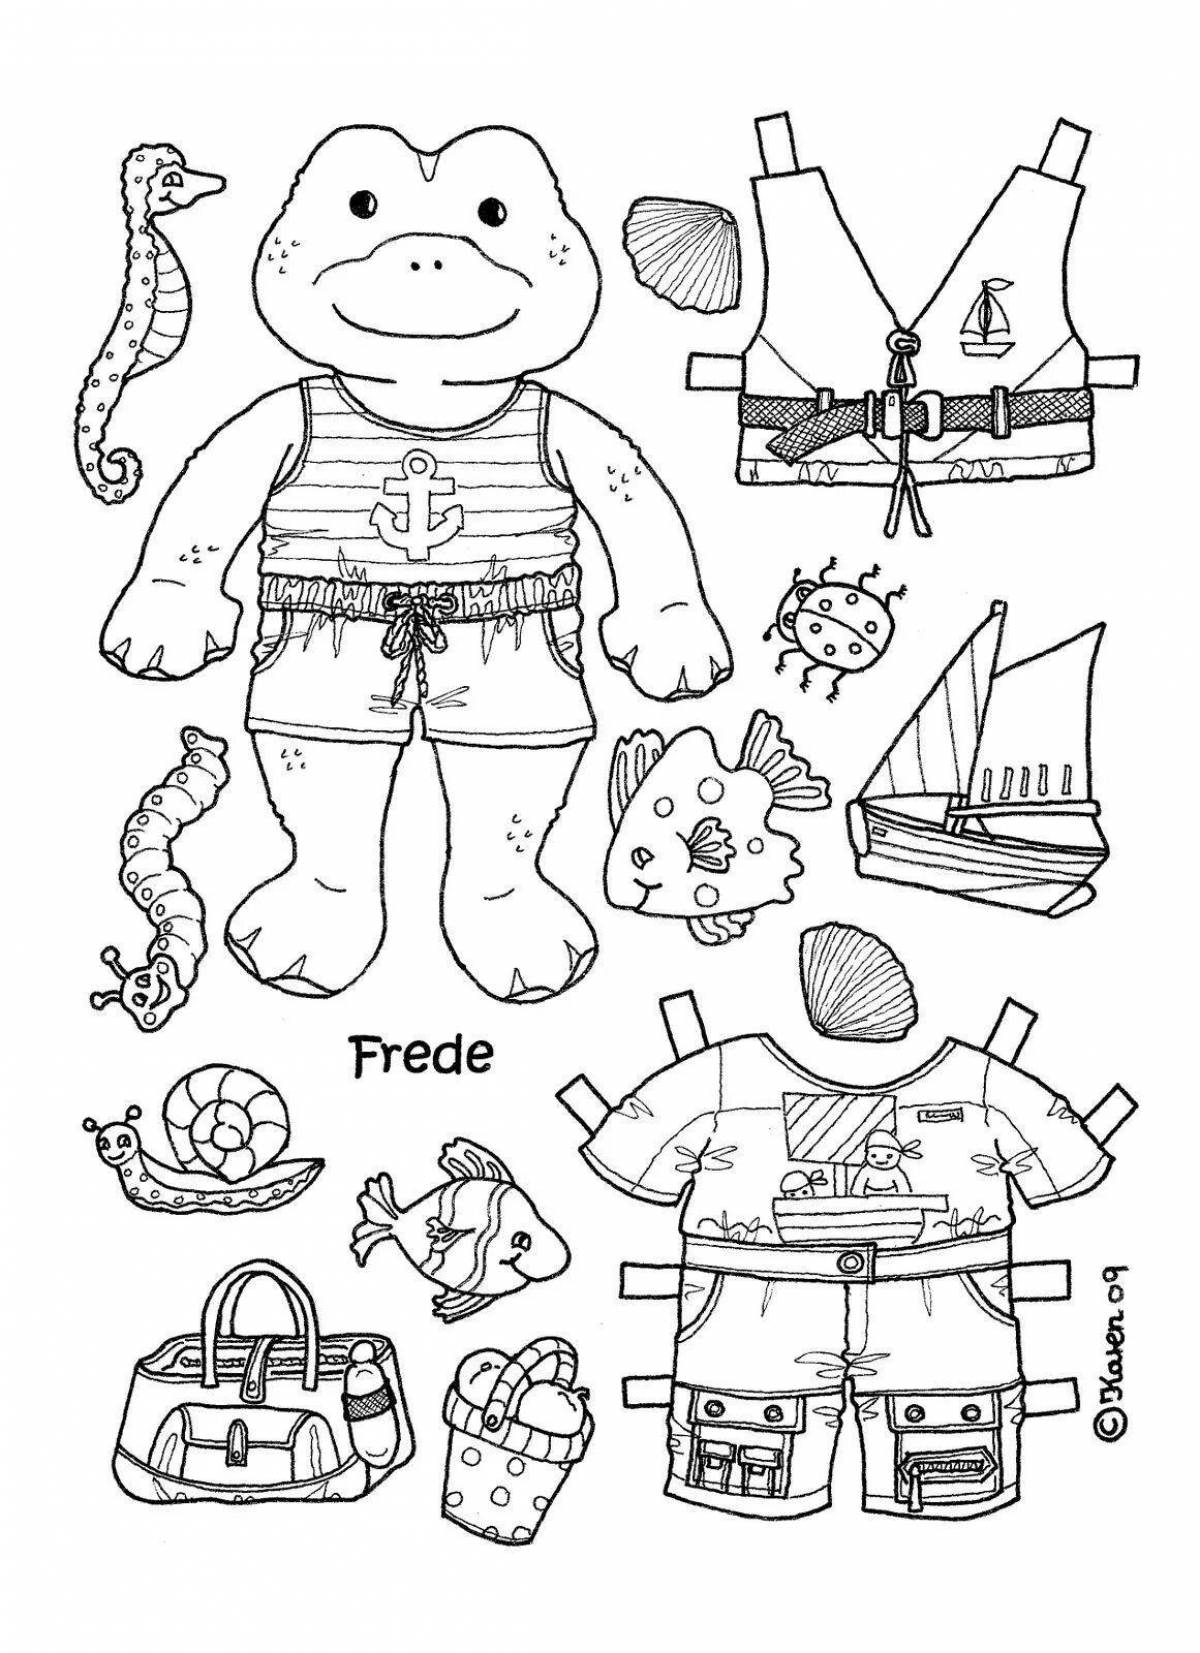 Fancy cat coloring pages with clothes to cut out